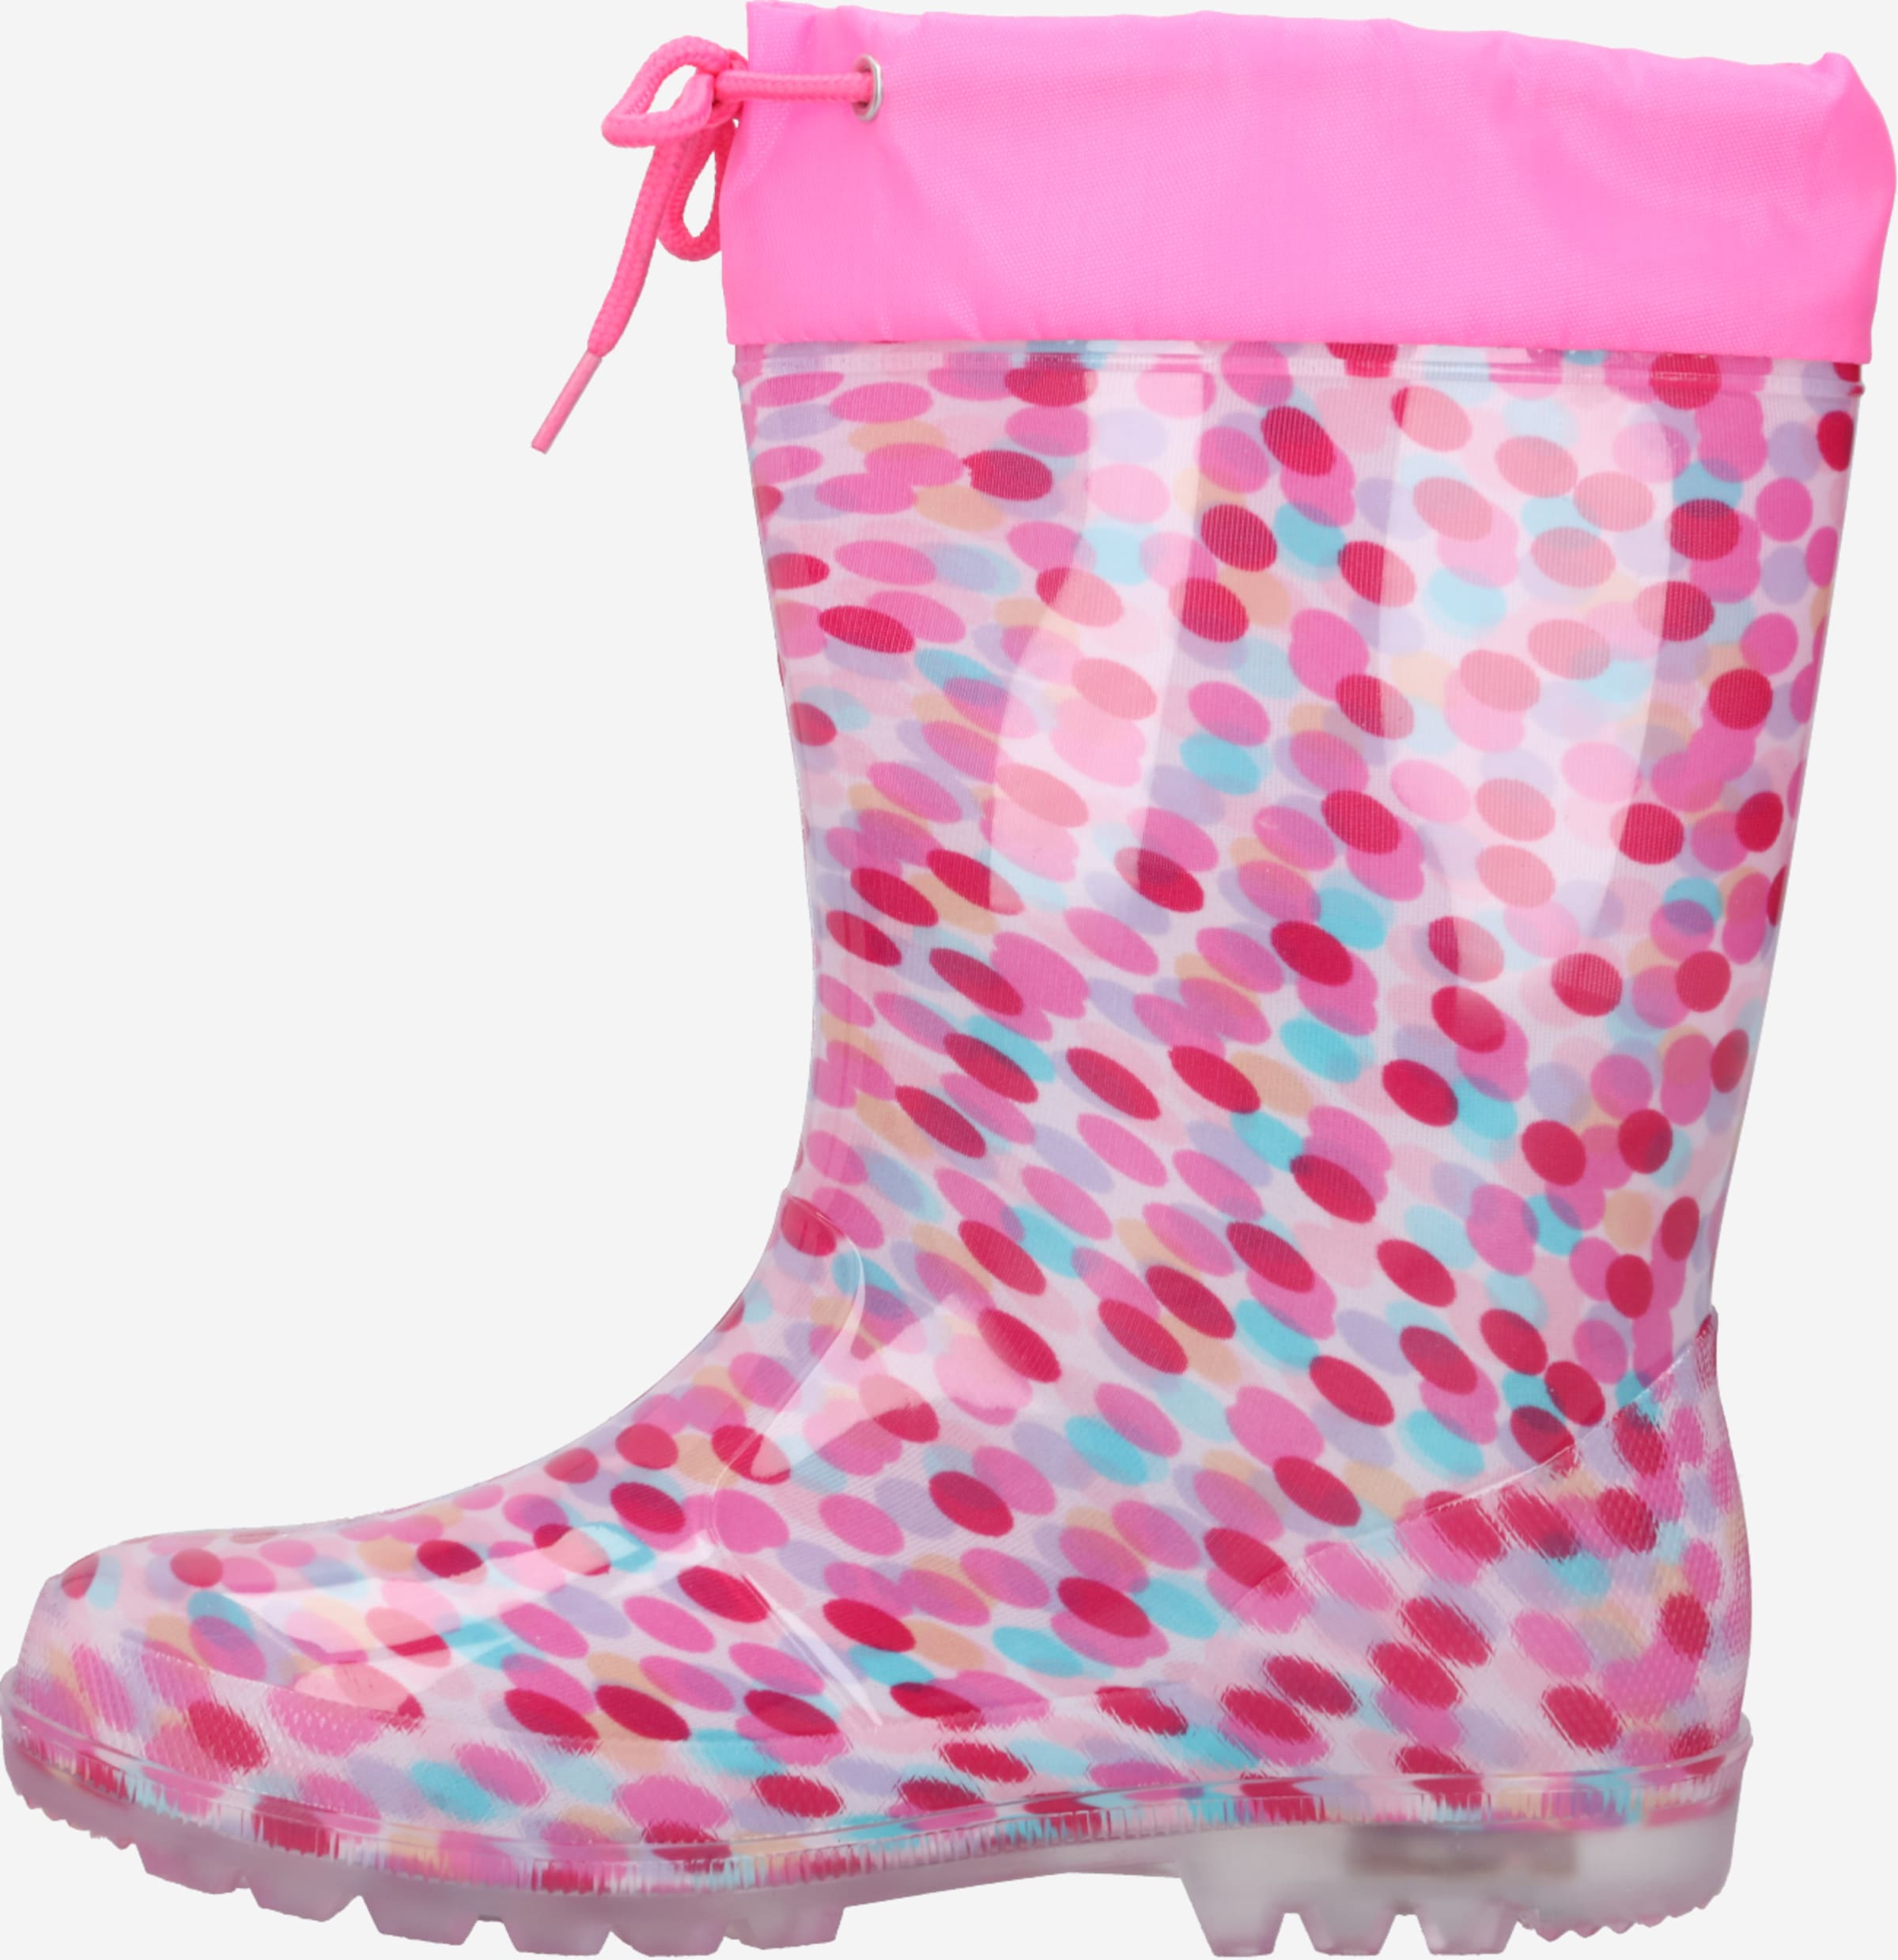 LICO Gummistiefel \'Power Blinky\' in Pink, Rosa | ABOUT YOU